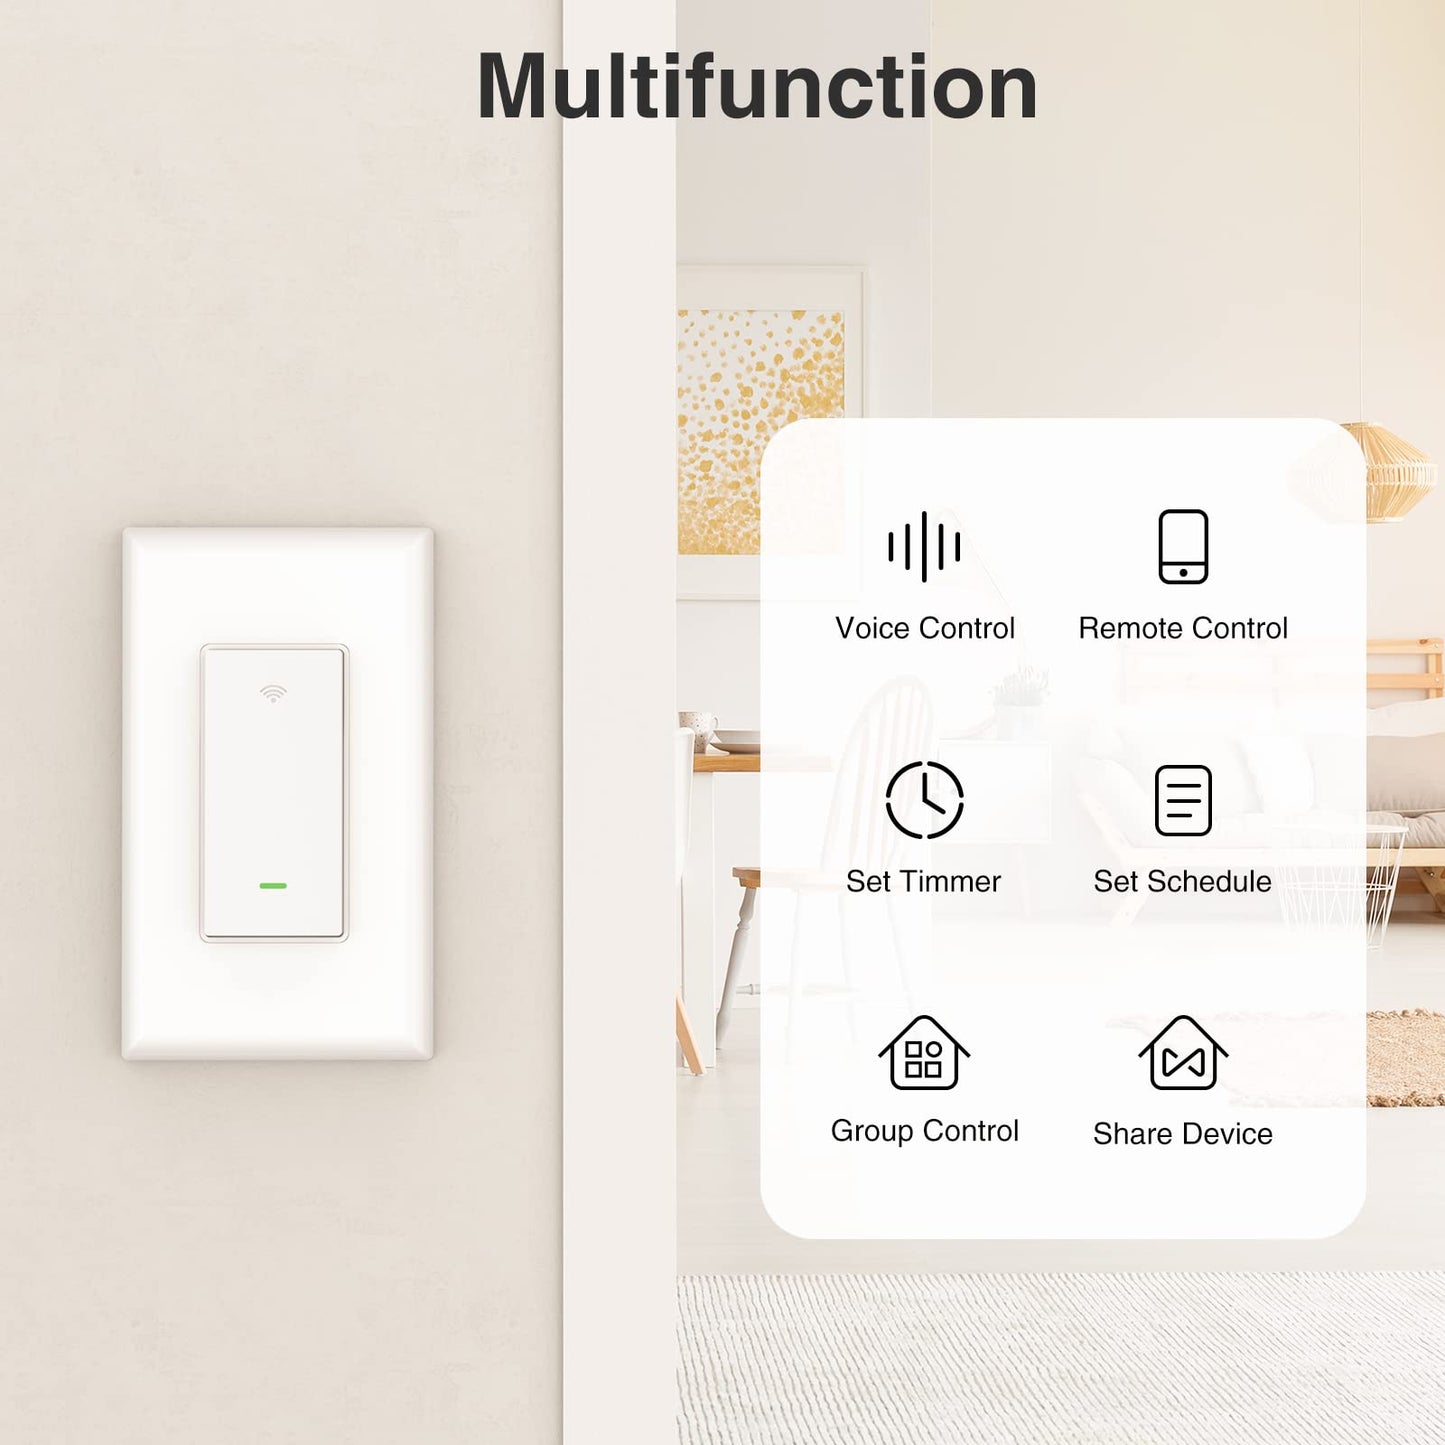 Smart Light Switch, 3 Way 2.4GHz Wi-Fi Smart Switch Compatible with Alexa and Google Home, Single Pole Wall Switch for Lights, ETL FCC Certified, Neutral Wire Required, No Hub Required (4 Pack)